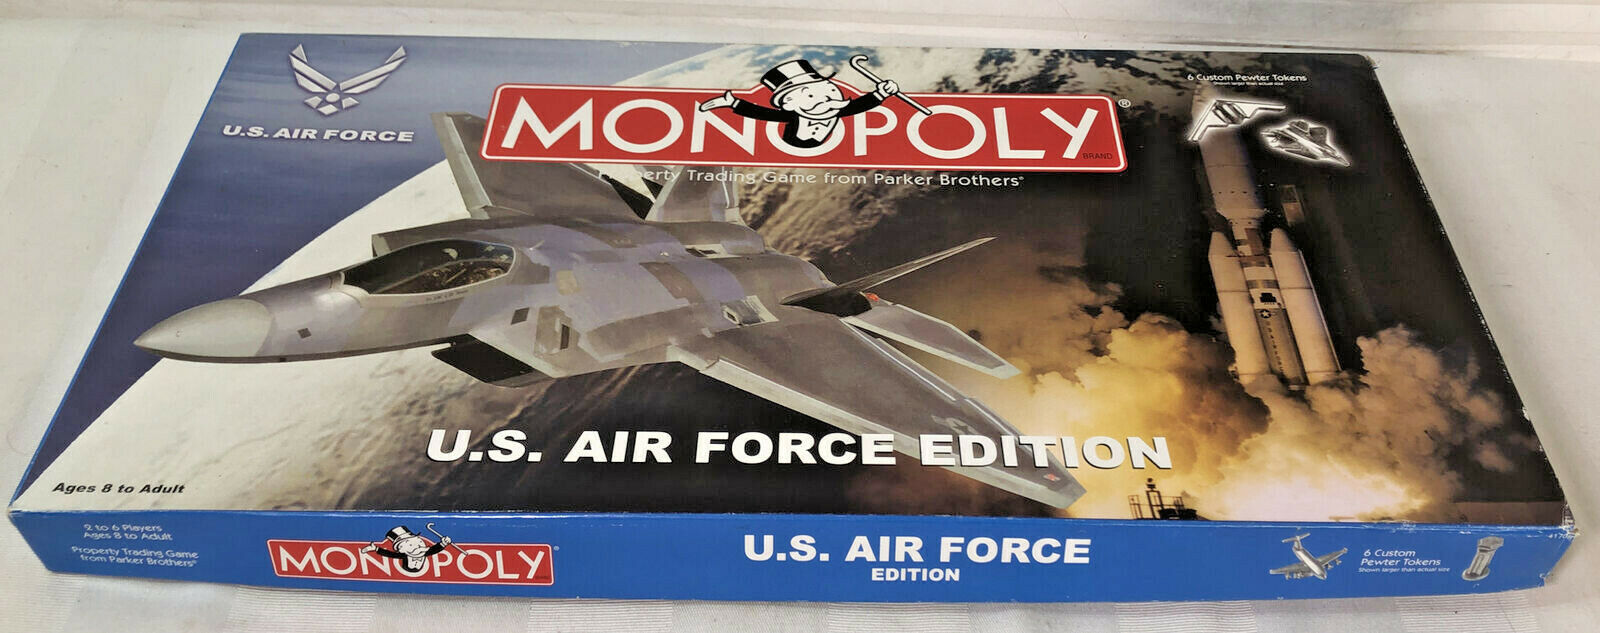 Primary image for Monopoly U.S. Air Force Edition 2005 Board Game Factory Sealed Military RARE